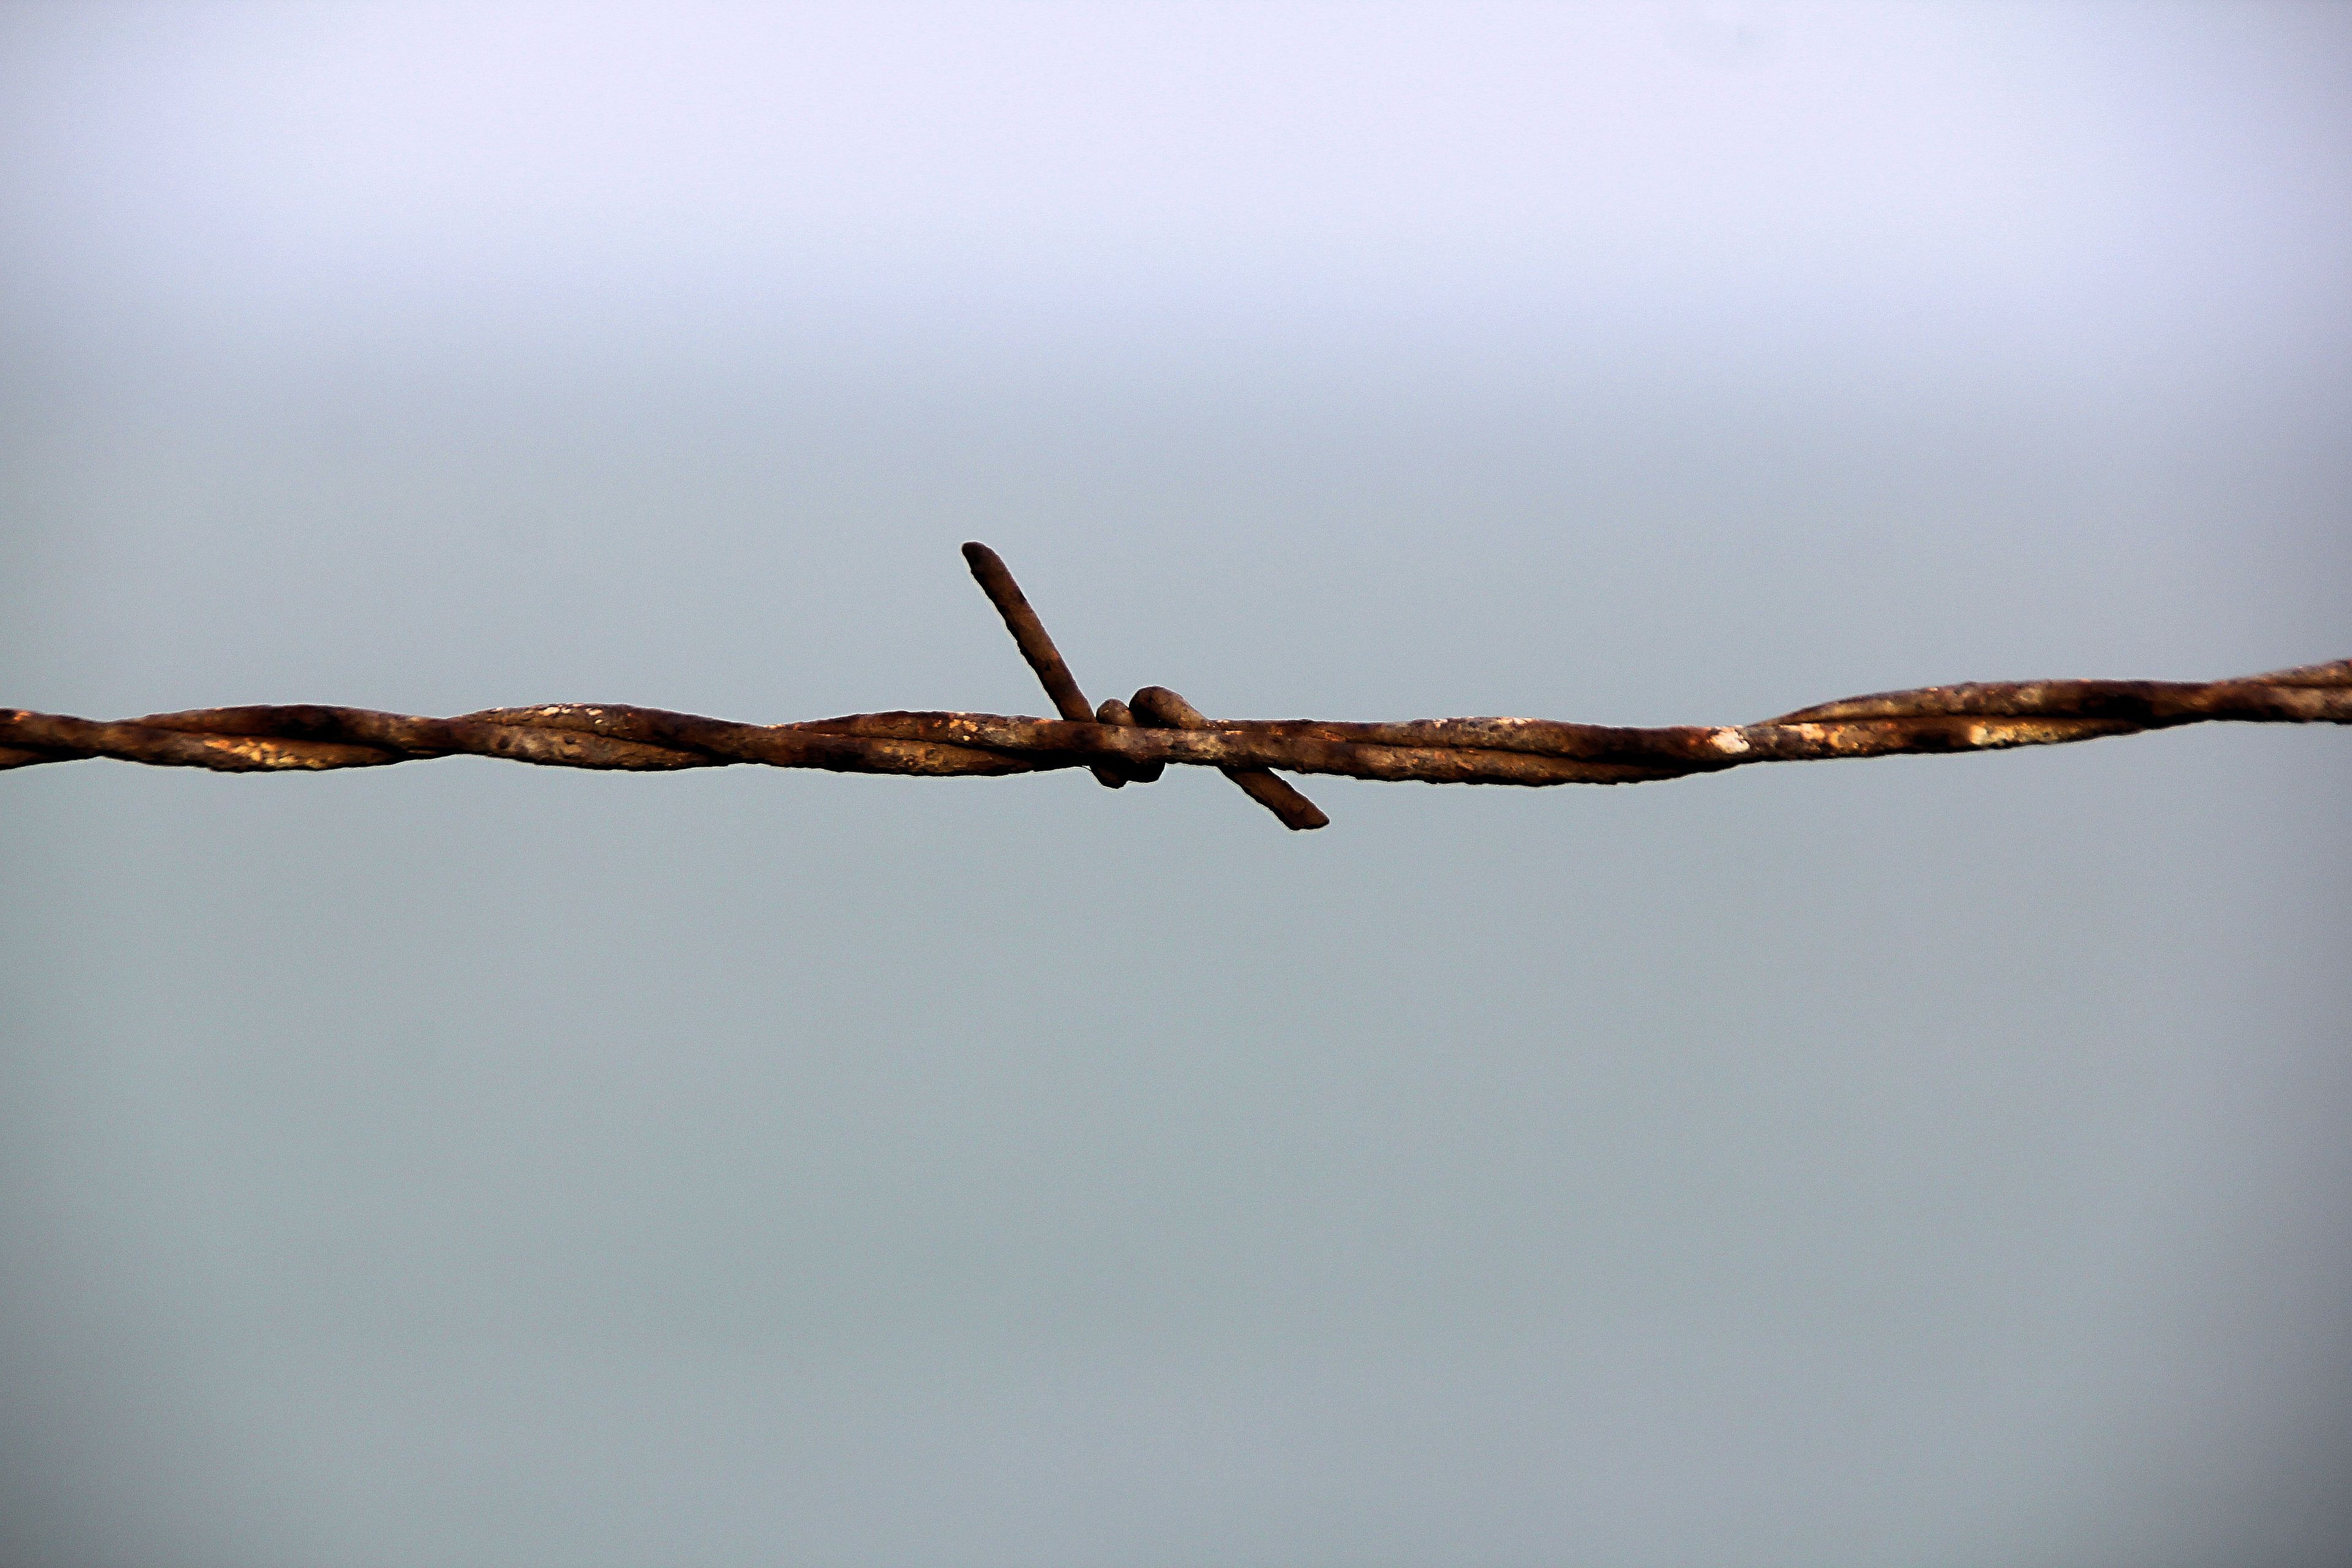 A close-up of a piece of barbed wire.